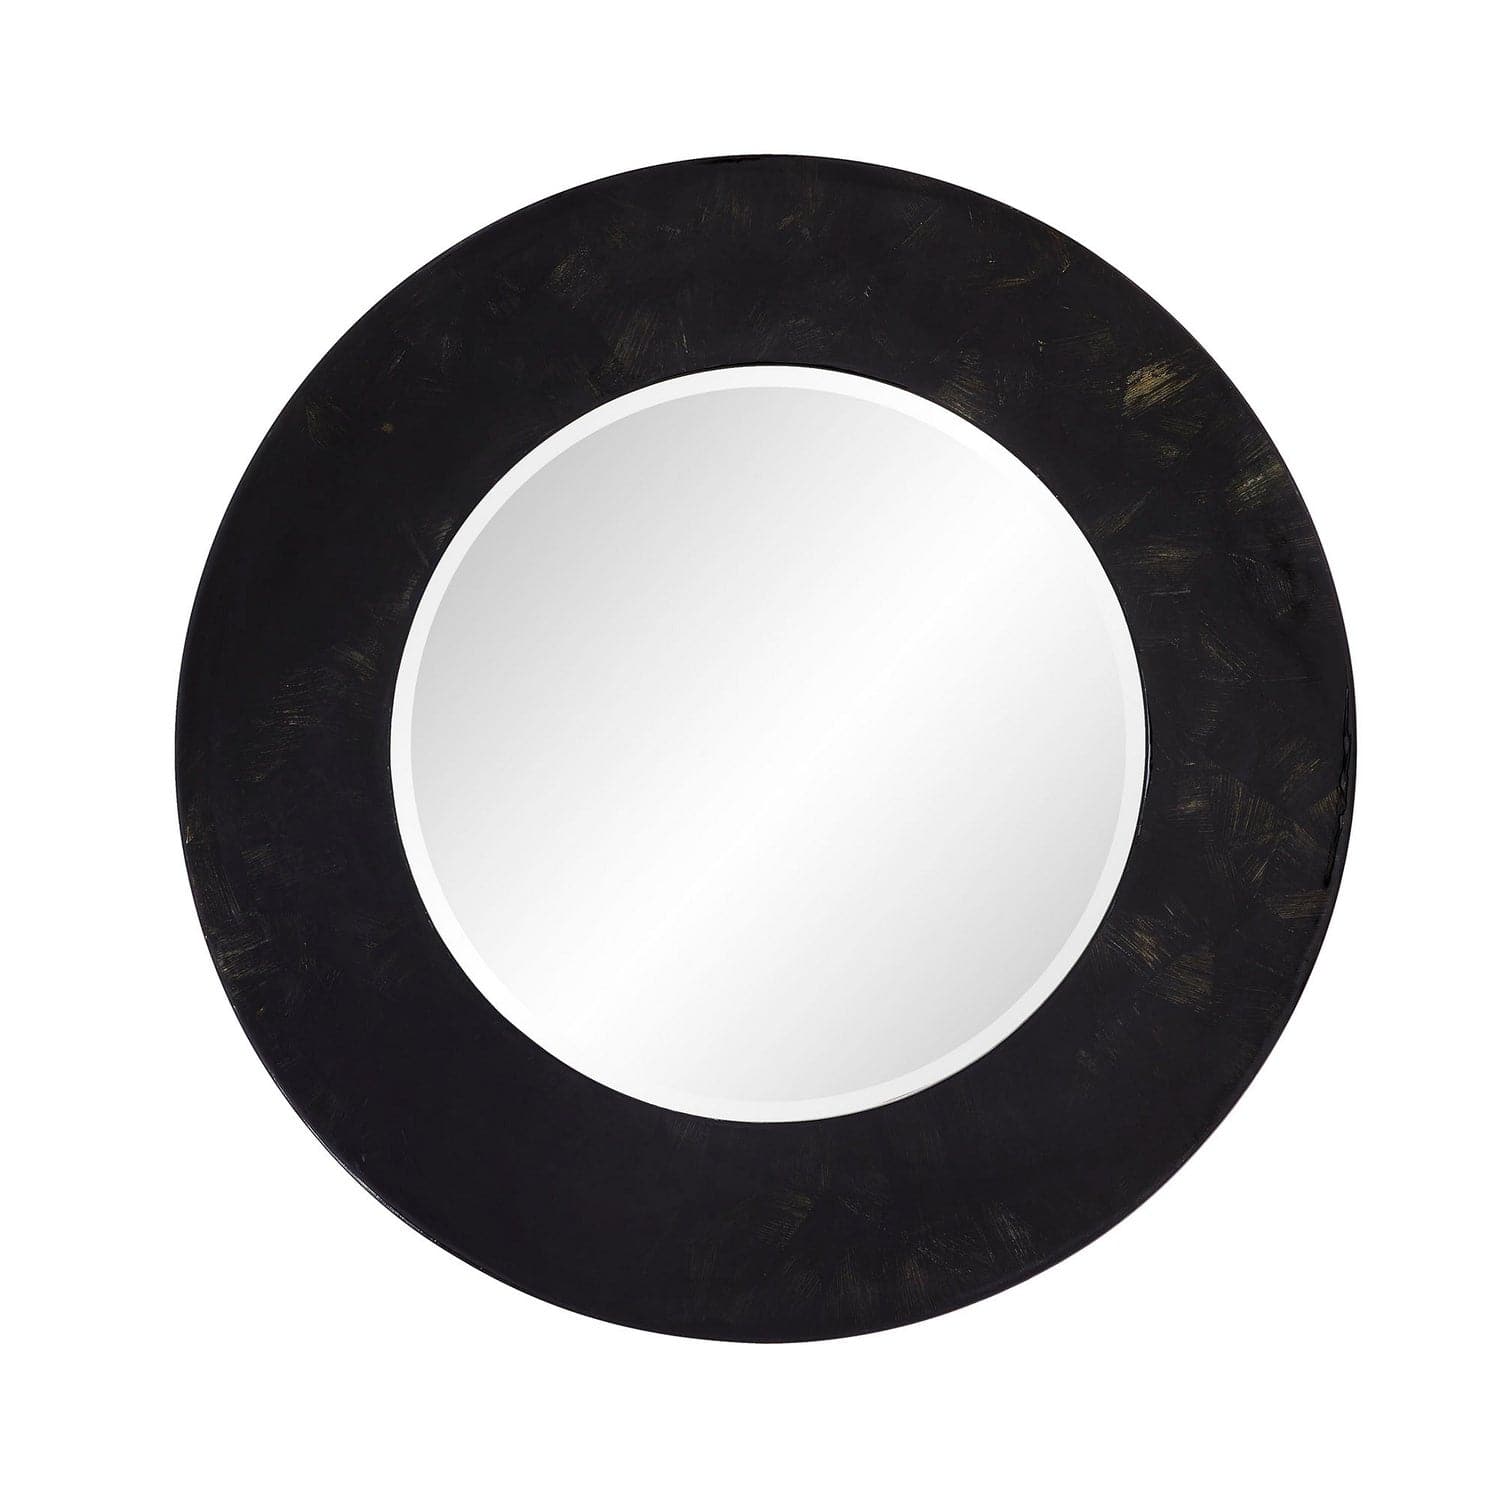 Arteriors - 5019 - Mirrors/Pictures - Mirrors-Oval/Rd. - Lona